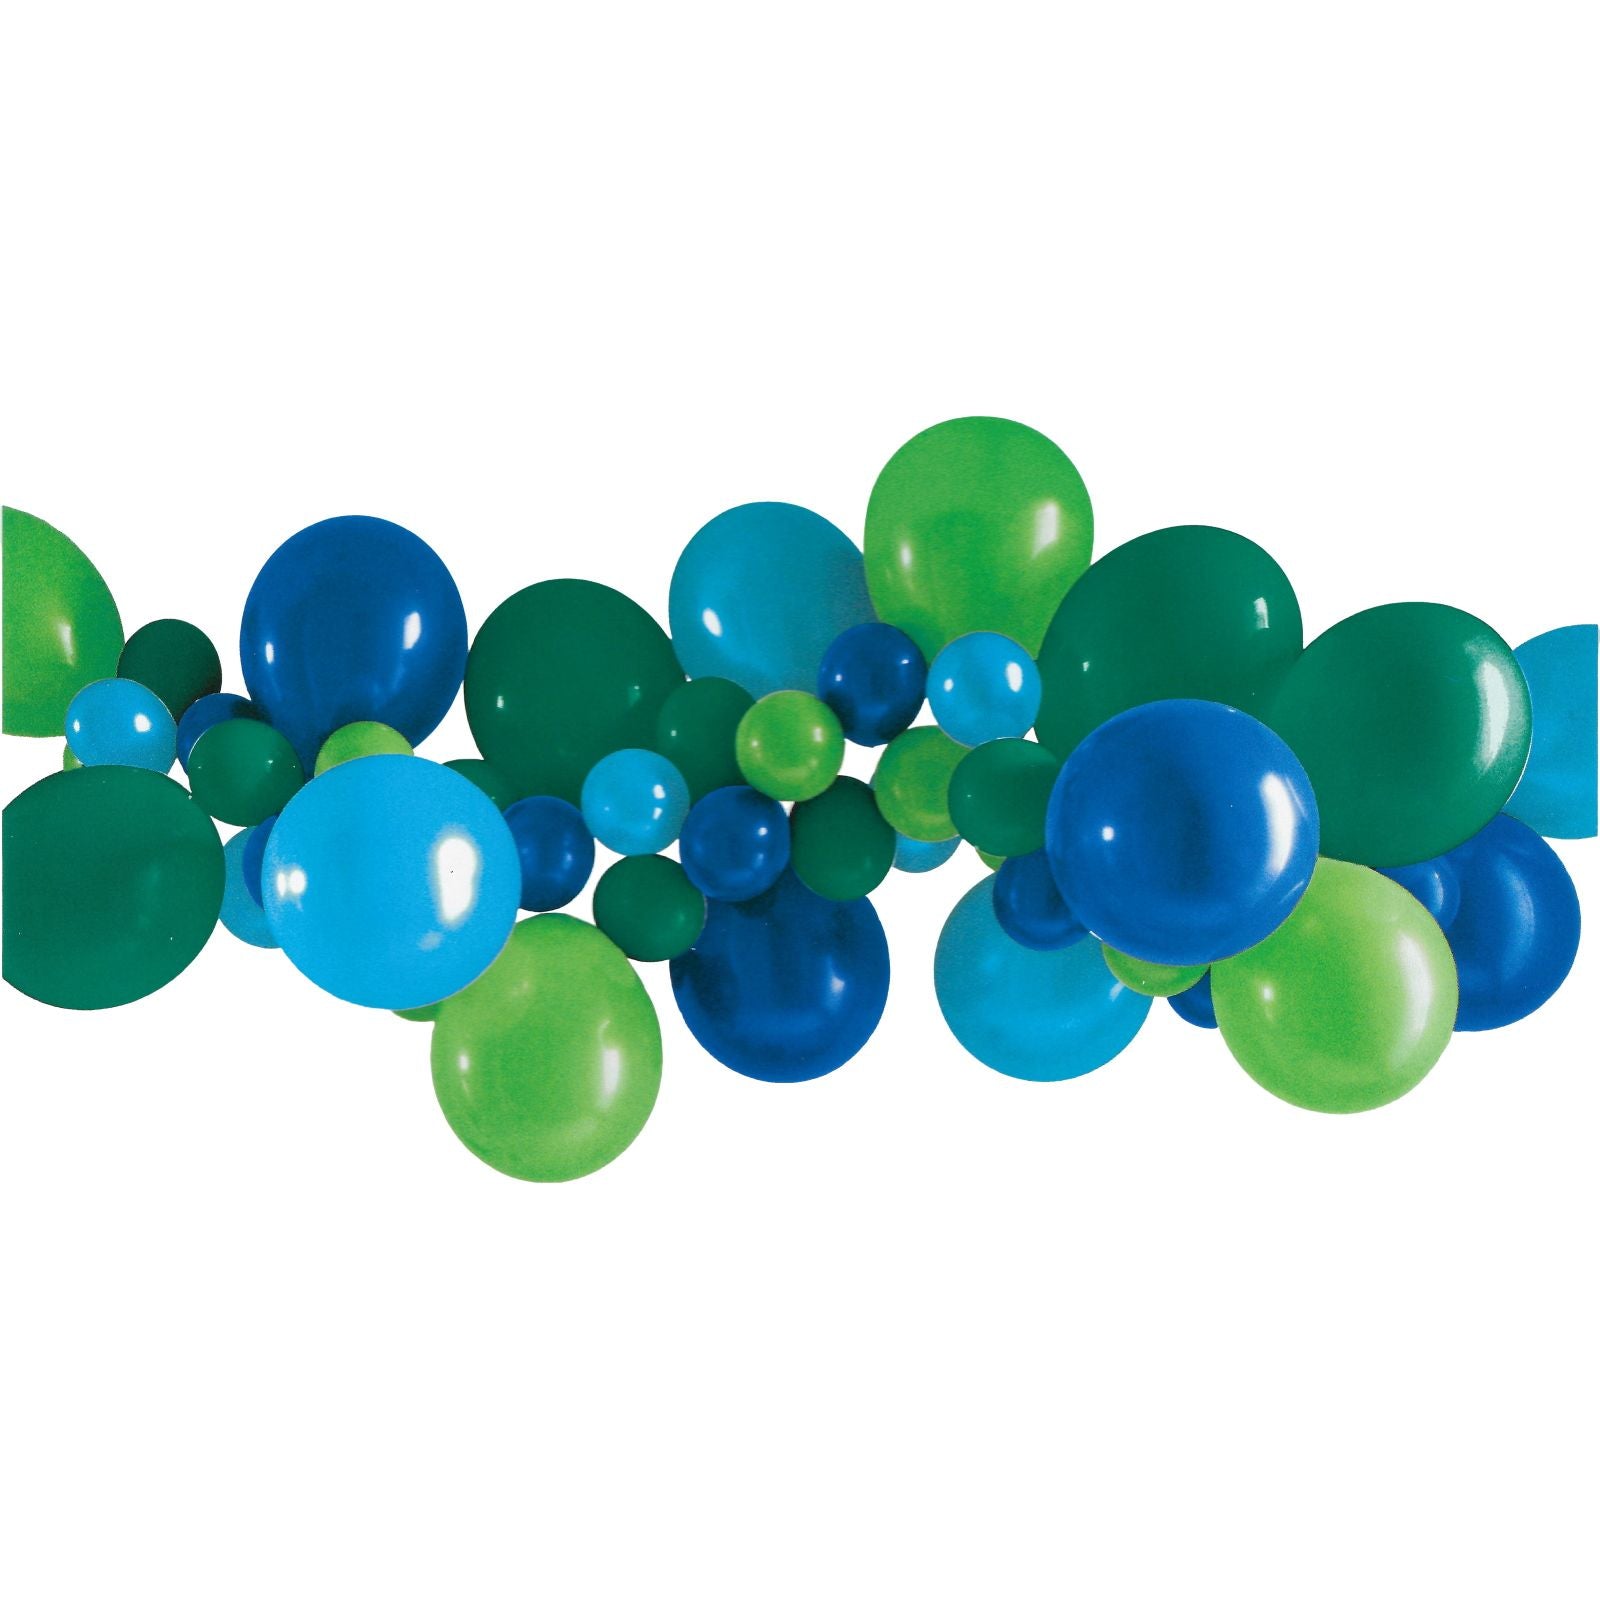 Balloon Garland Kit | Blue & Green - The Party Room